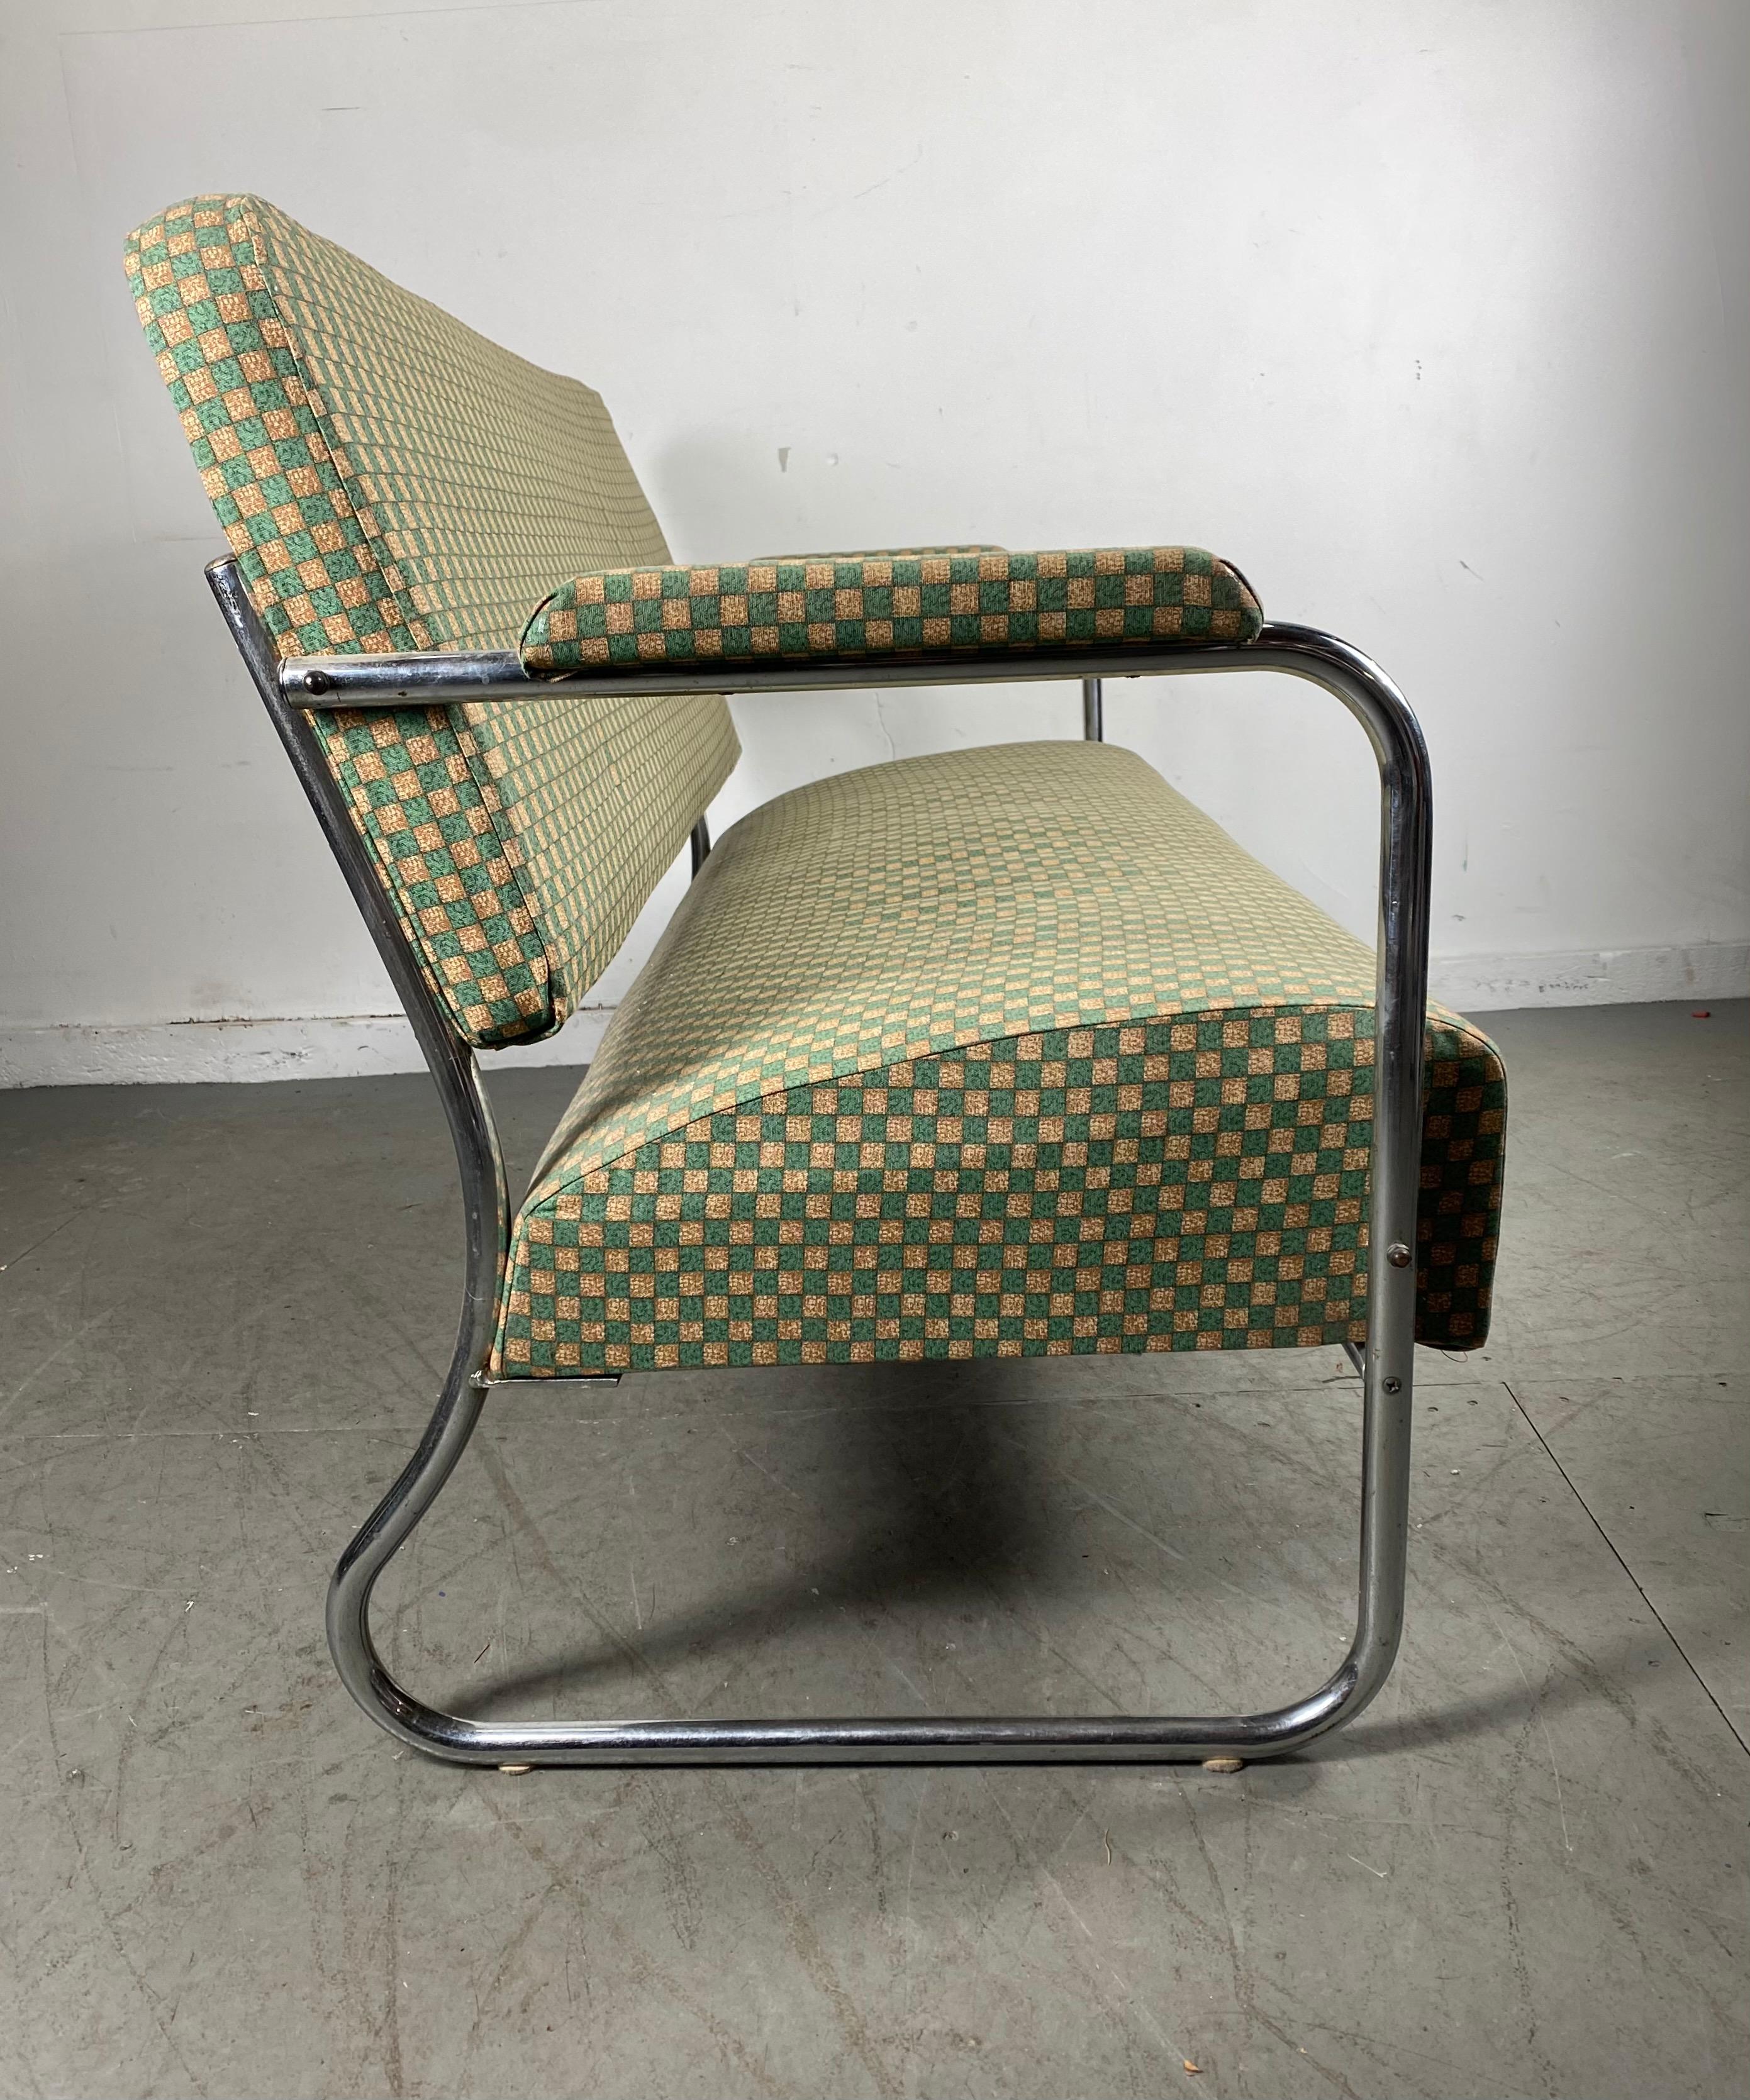 Seldom seen tubular chrome settee / sofa designed by Gilbert Rohde manufactured by Troy Sunshade, model 5556. Beautiful original condition, reupholstered at some point, probably in the 1970s, interesting checkerboard pattern fabric, retains original